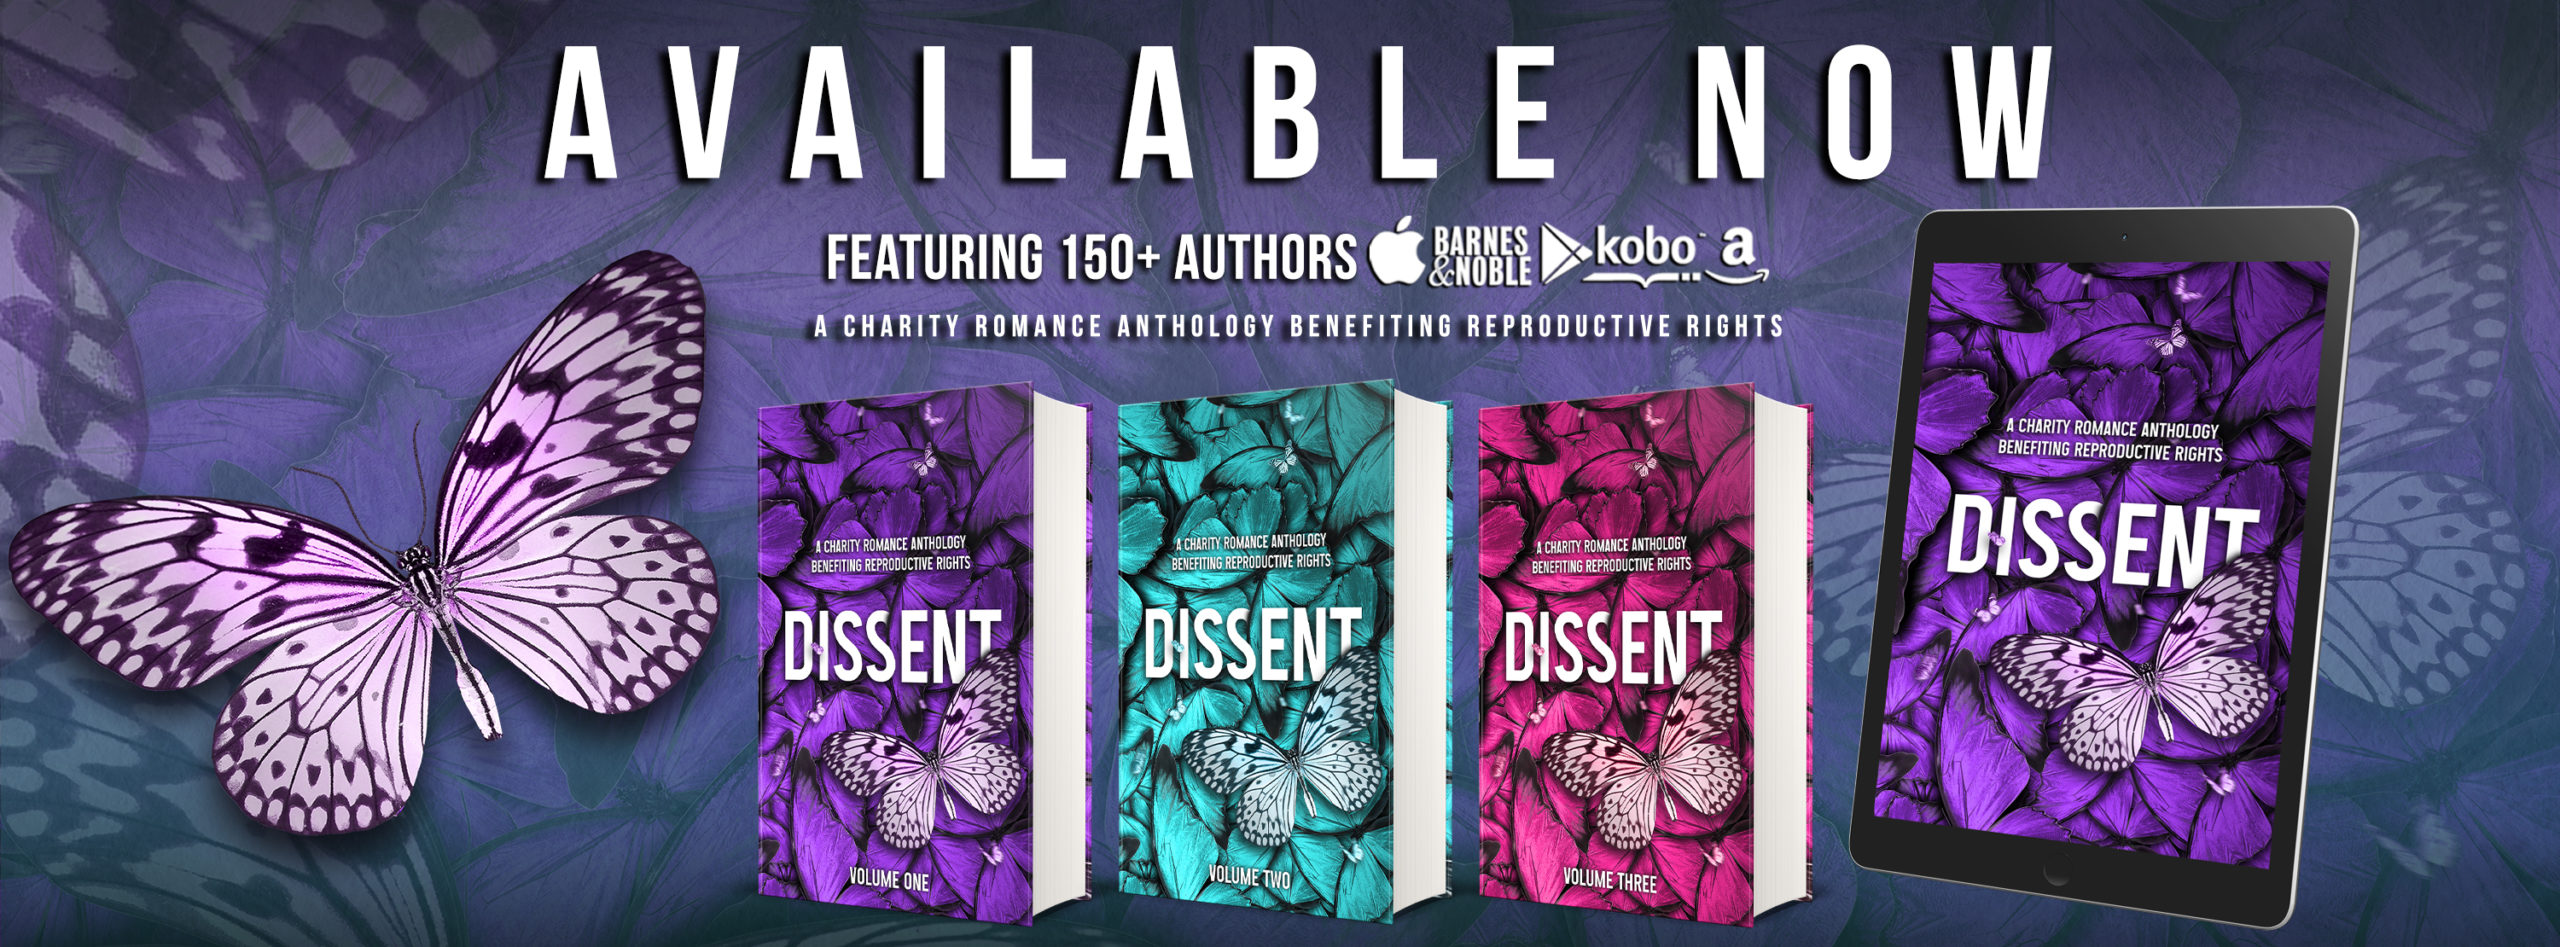 Banner image for Dissent: A Charity Romance Anthology showing multiple versions of the book as well as the text "Available Now" with a lit of retailers (Amazon, Apple, Kobo, etc.)